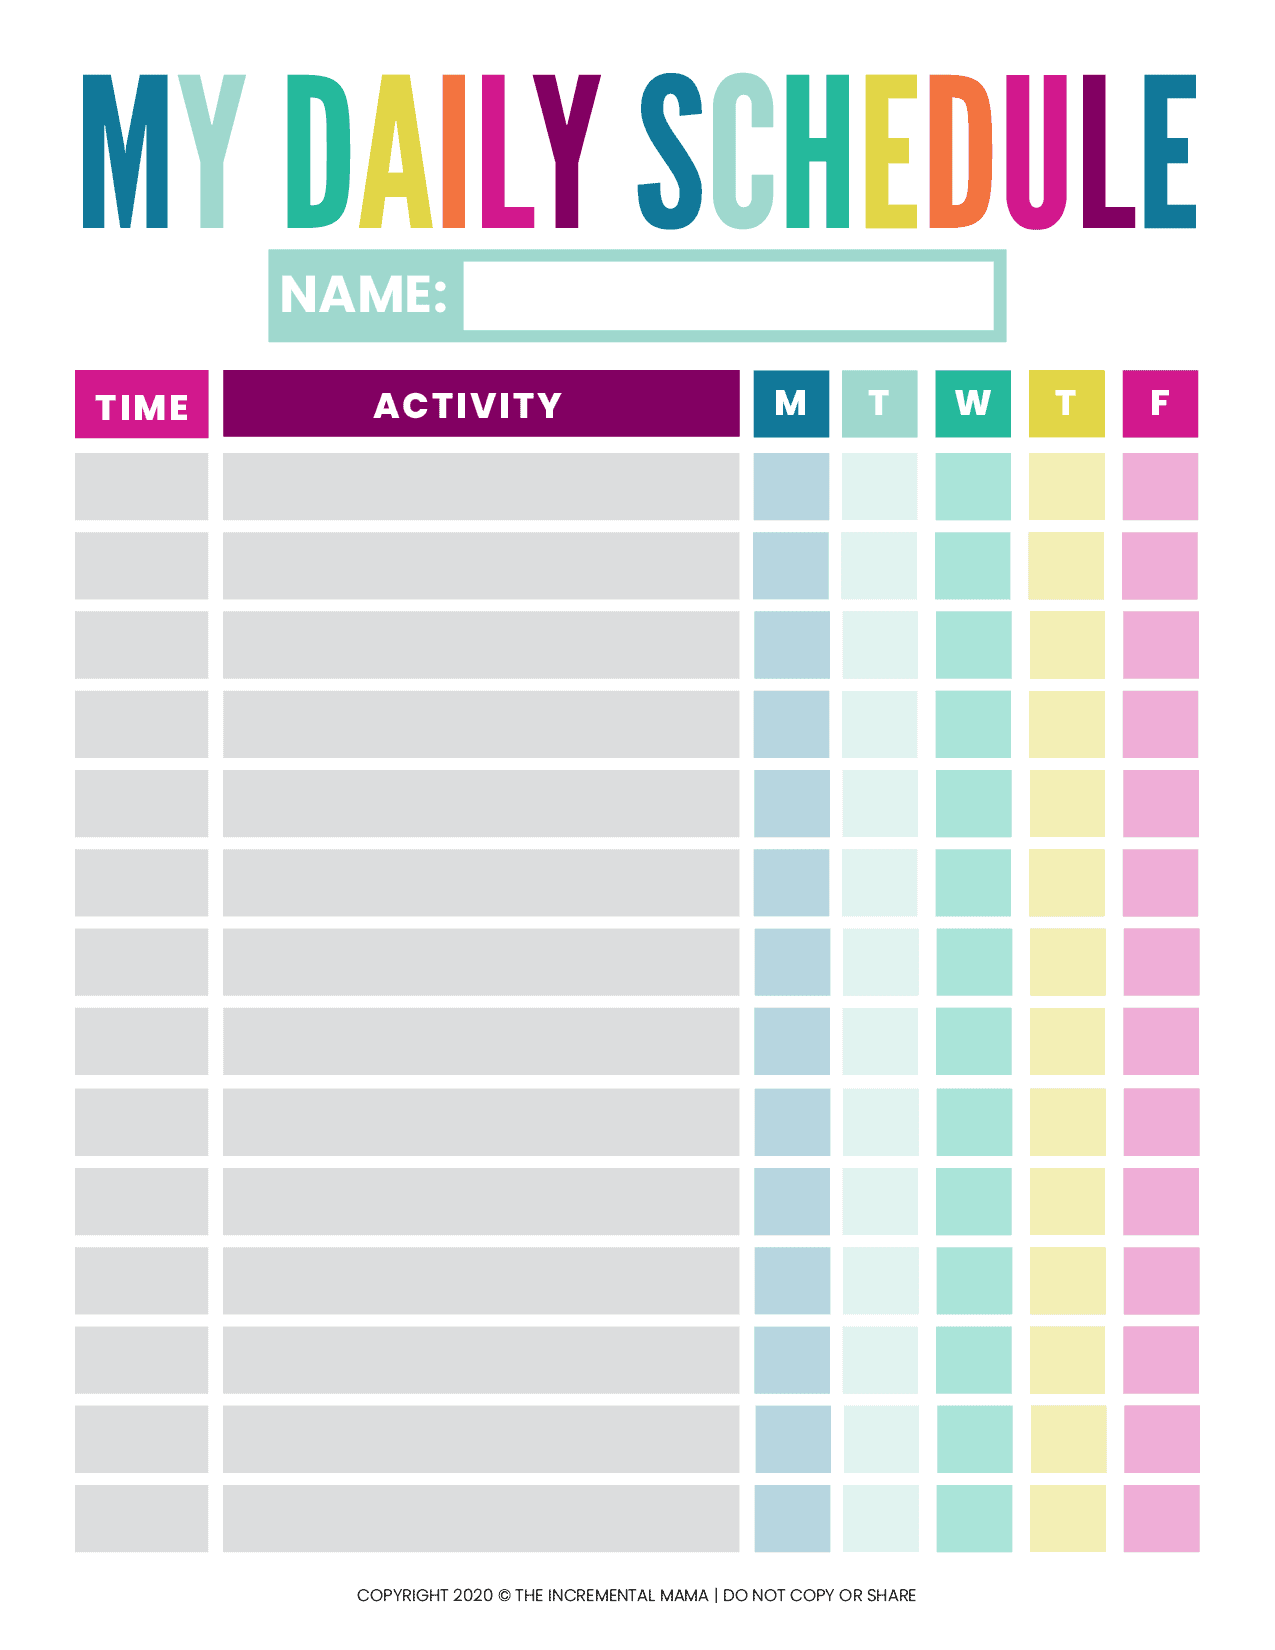 schedule for classroom daily schedule for kids